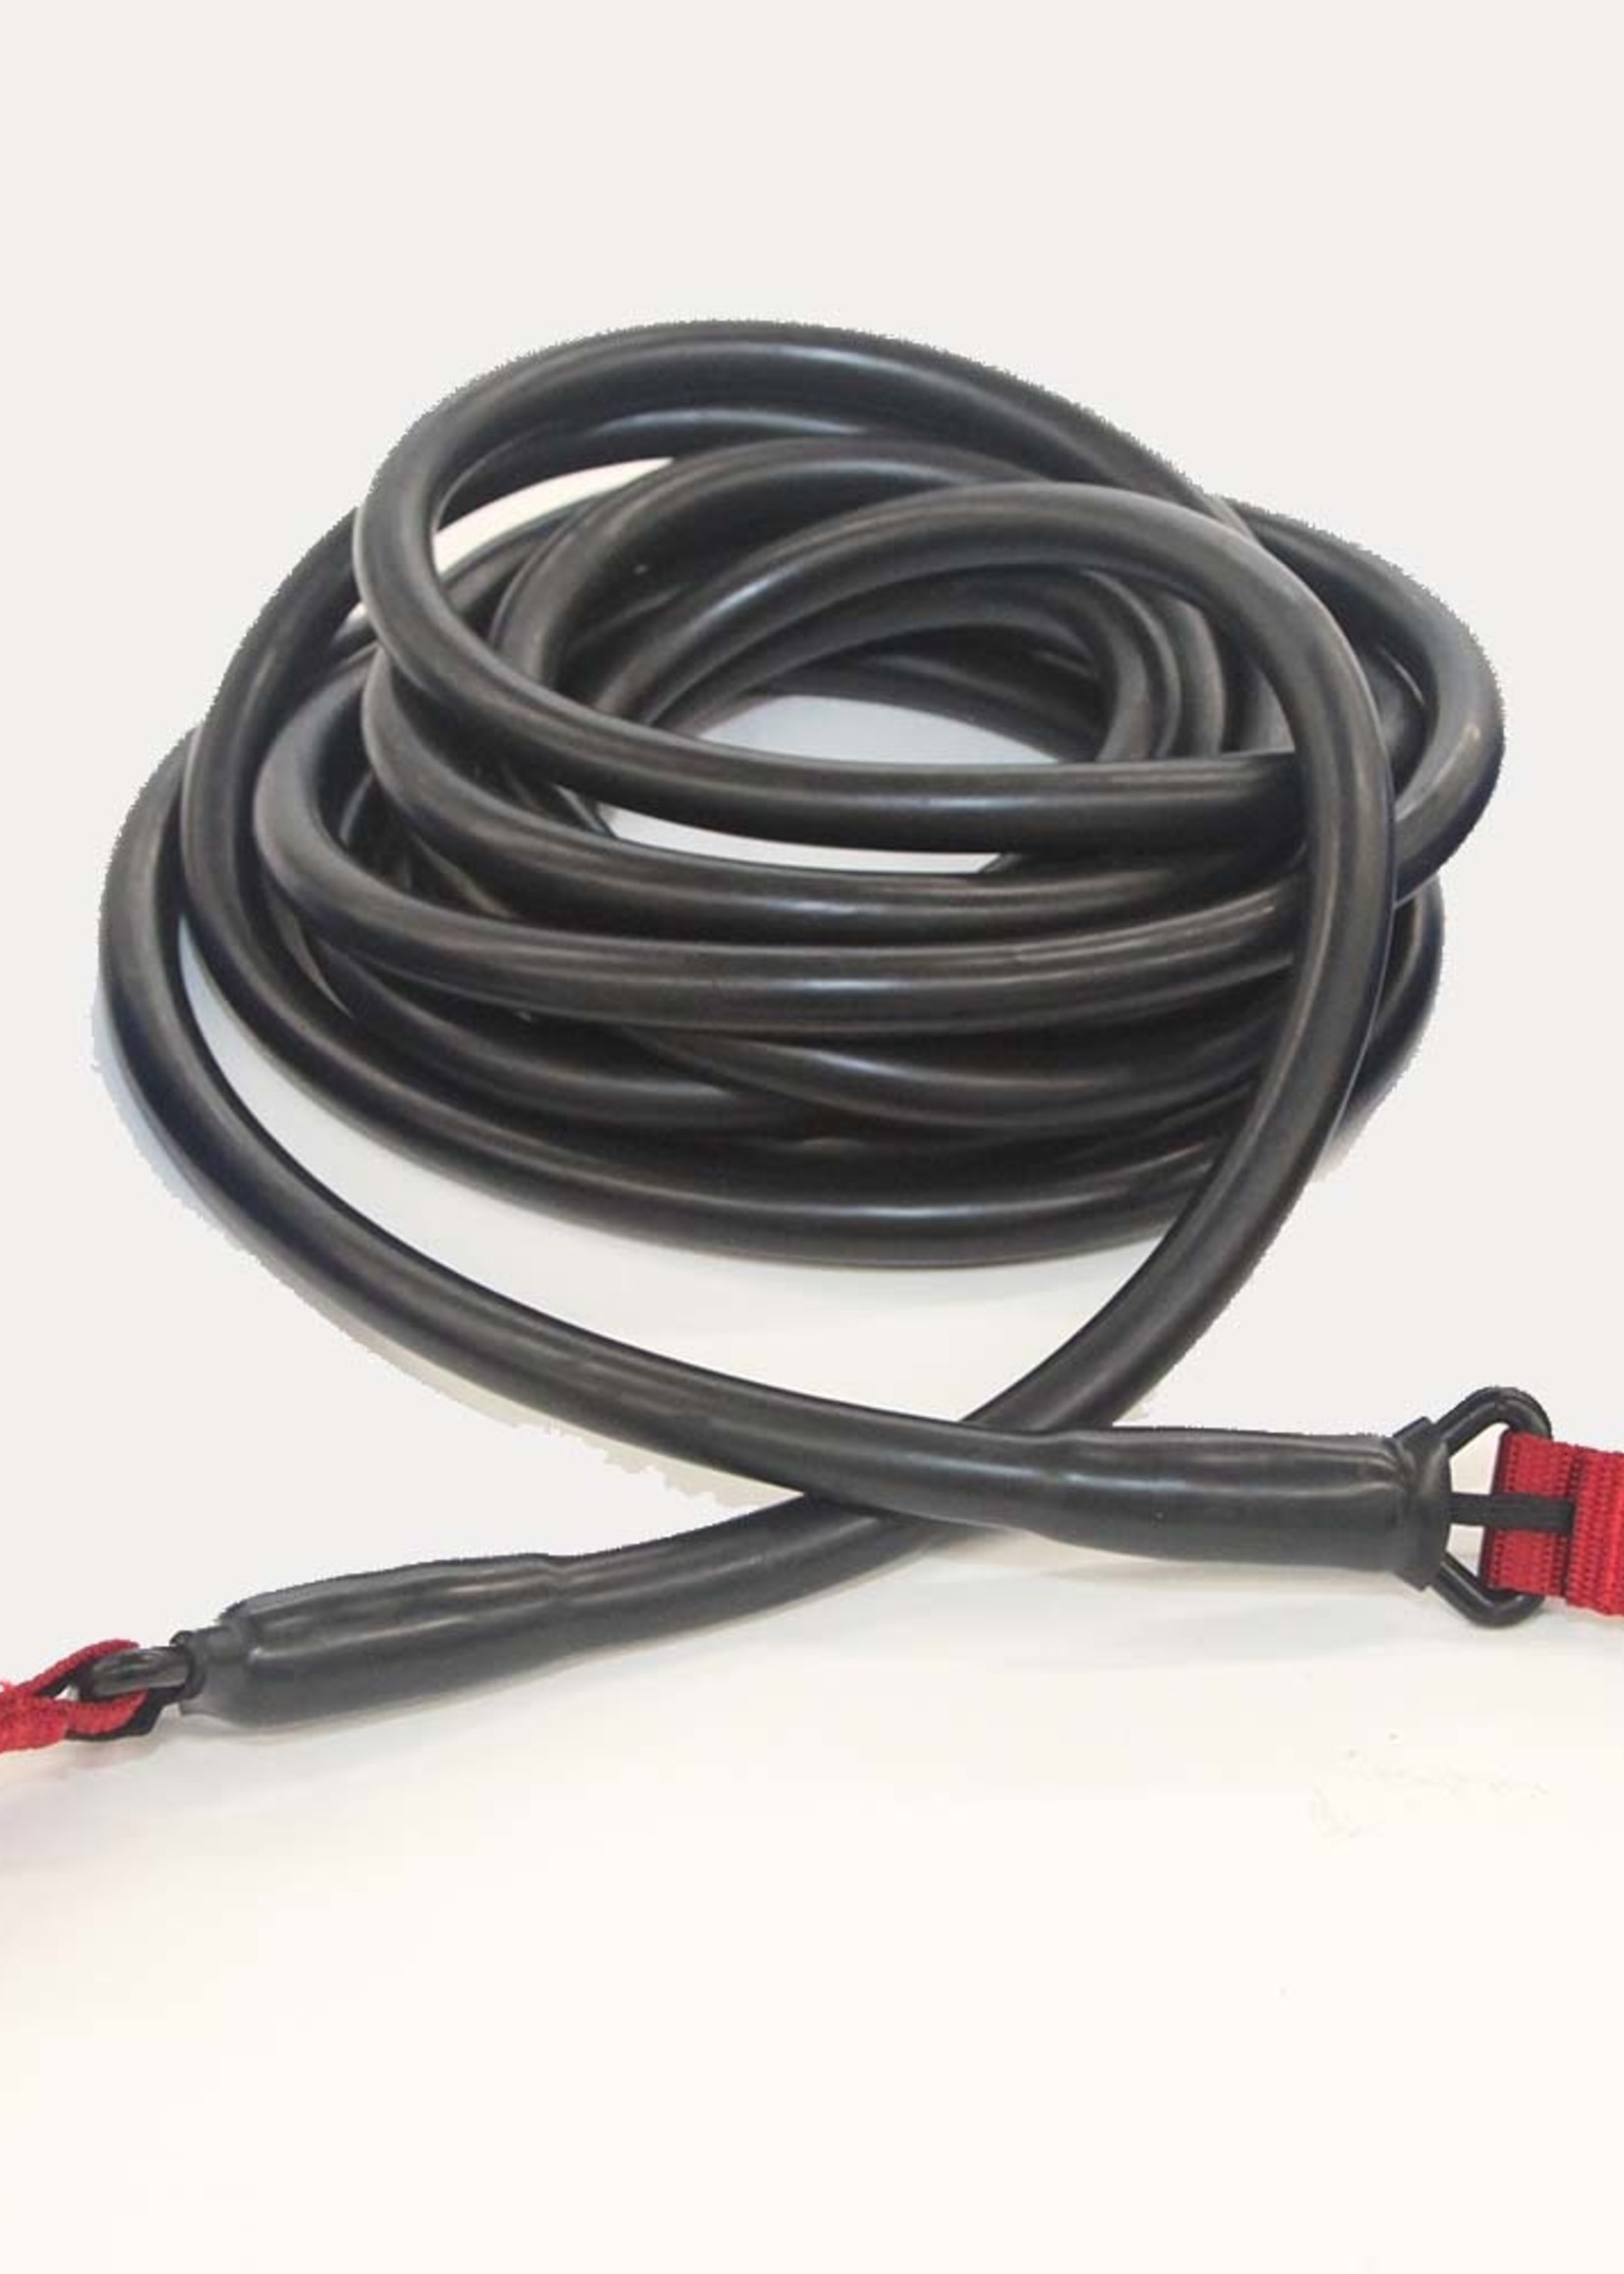 StrechCordz Quick Connect Replacement Safety Cord Tubing